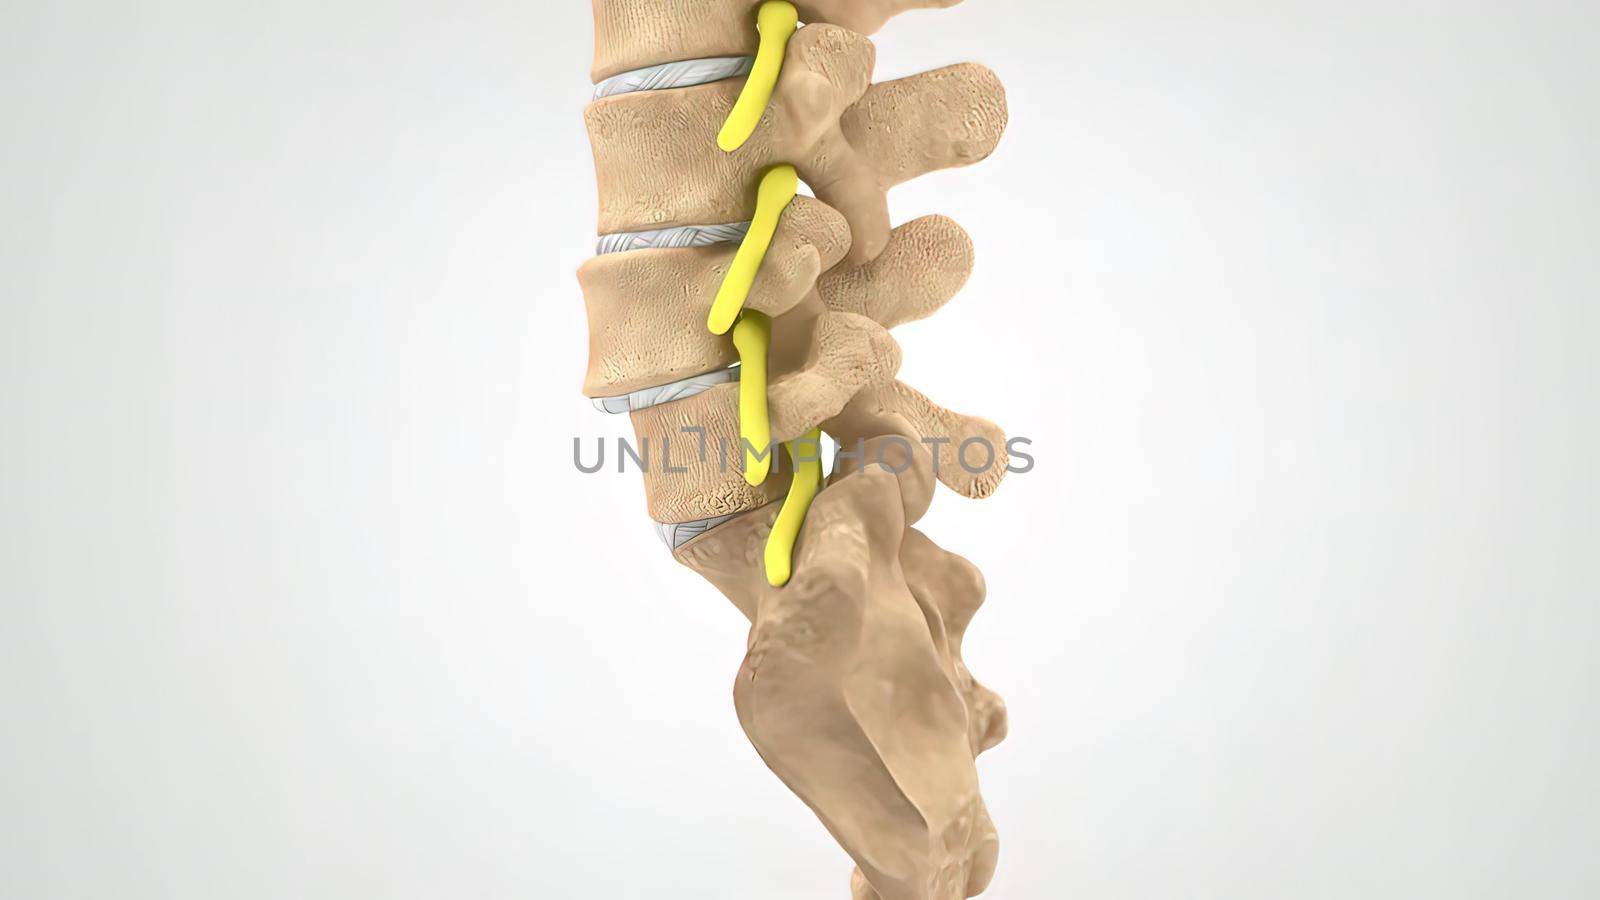 Human spine in details: Vertebra, bone marrow, disc and nerves by creativepic